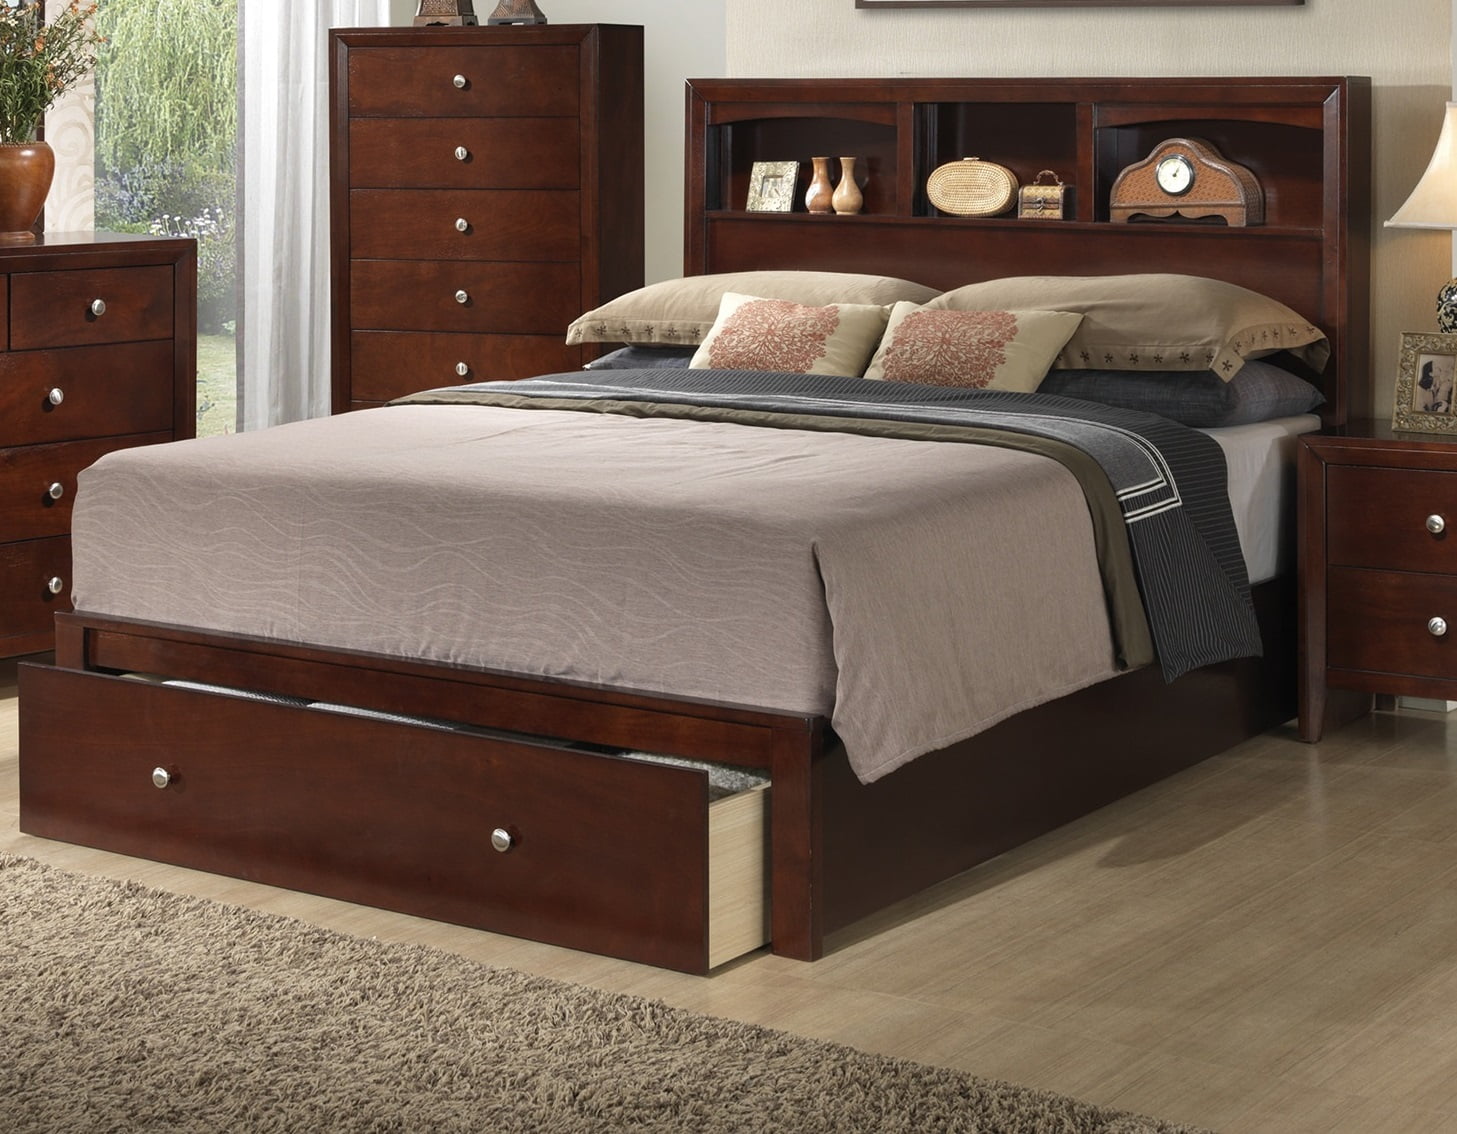 Bedroom Furniture 1pc California King, California King Platform Bed With Drawers